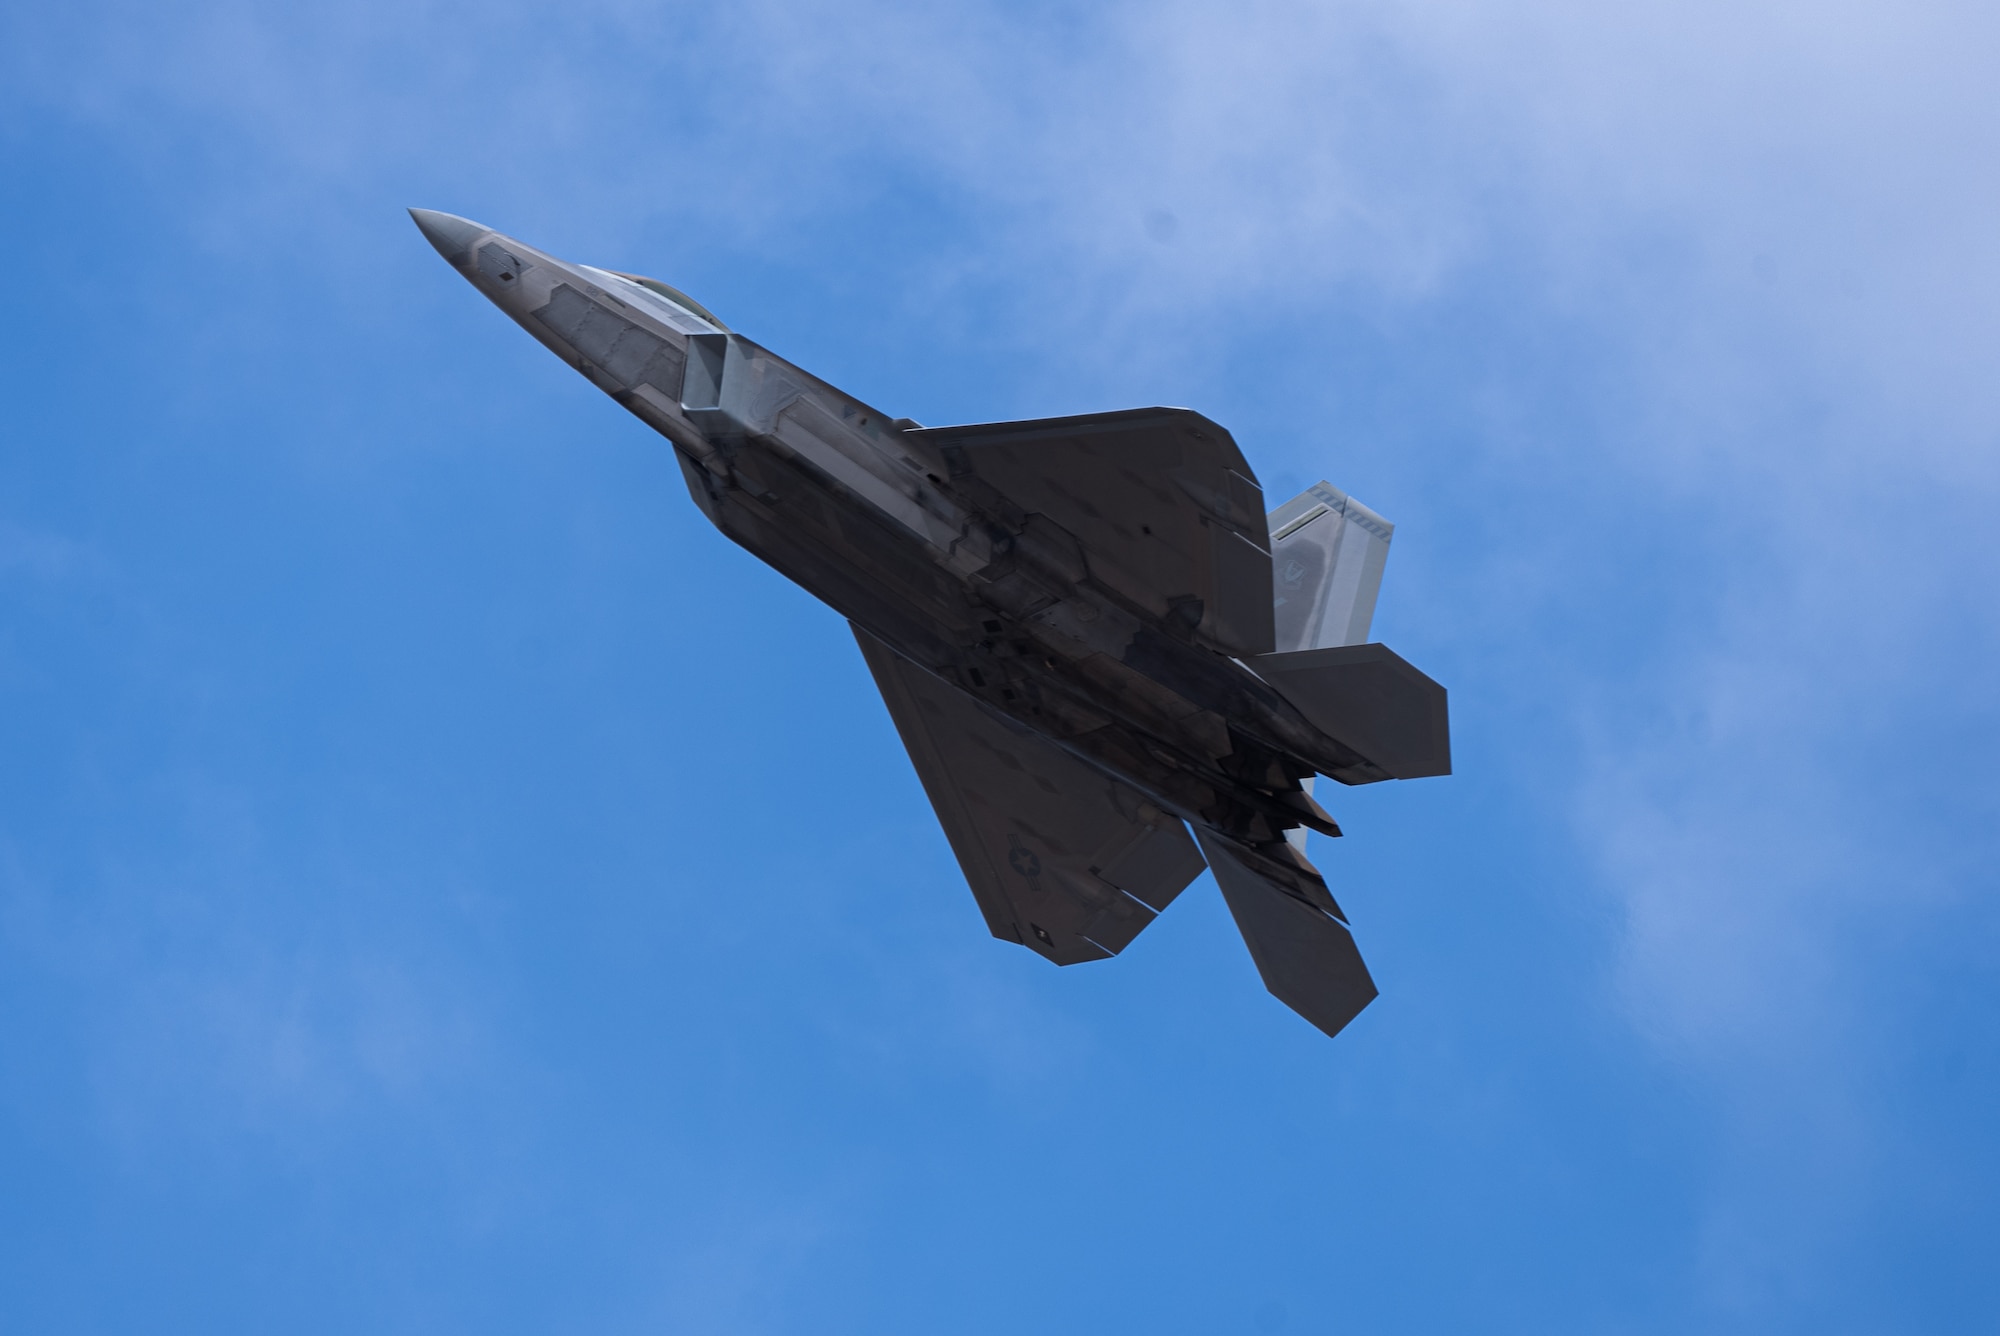 The F-22 Raptor demo team performs during the 2023 Dyess Big Country Air Fest on Dyess Air Force Base, Texas, April 22, 2023. More than 30,000 event goers attended the one-day event highlighting the best of America’s only Lift and Strike base, Air Force heritage and Dyess community partners. The air show featured the F-22 Raptor demo team, U.S. Air Force Academy Wings of Blue, U.S. Army Golden Knights, WW II heritage flight and B-1B Lancer and C-130J Super Hercules fly overs. (U.S. Air Force photo by Airman 1st Class James Hall)